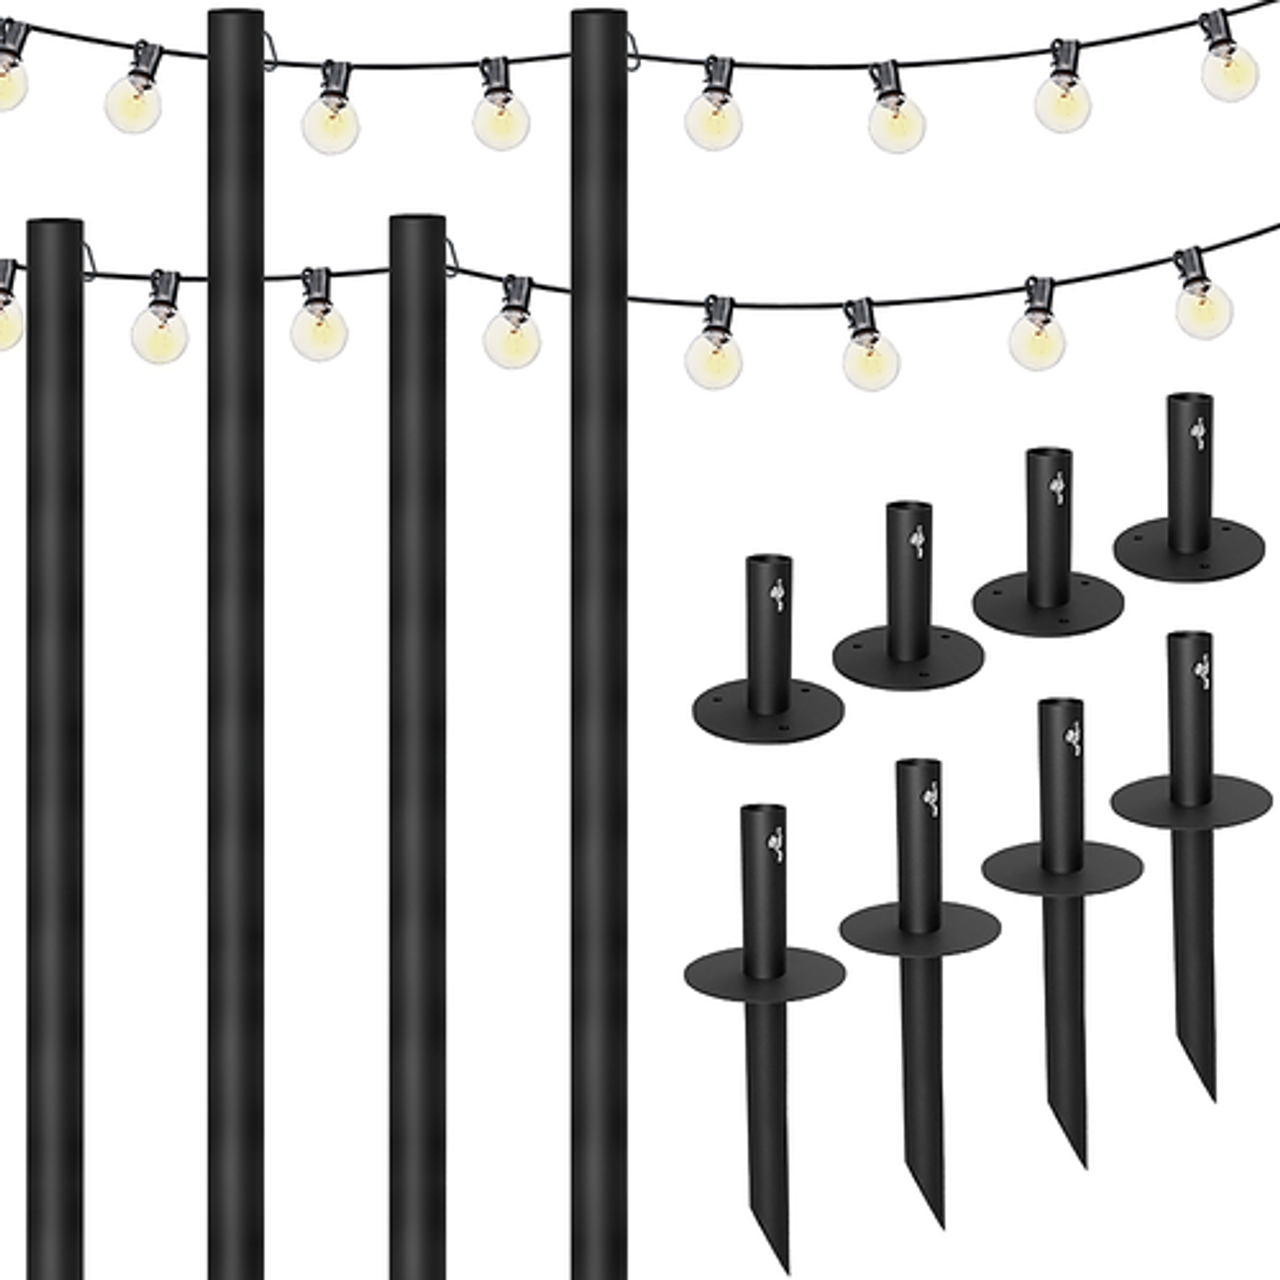 Excello Global Products - Excello Global Bistro String Light Poles Black- 4 Pack with 100' lights - Extends to 10 Feet - With Mounting Options